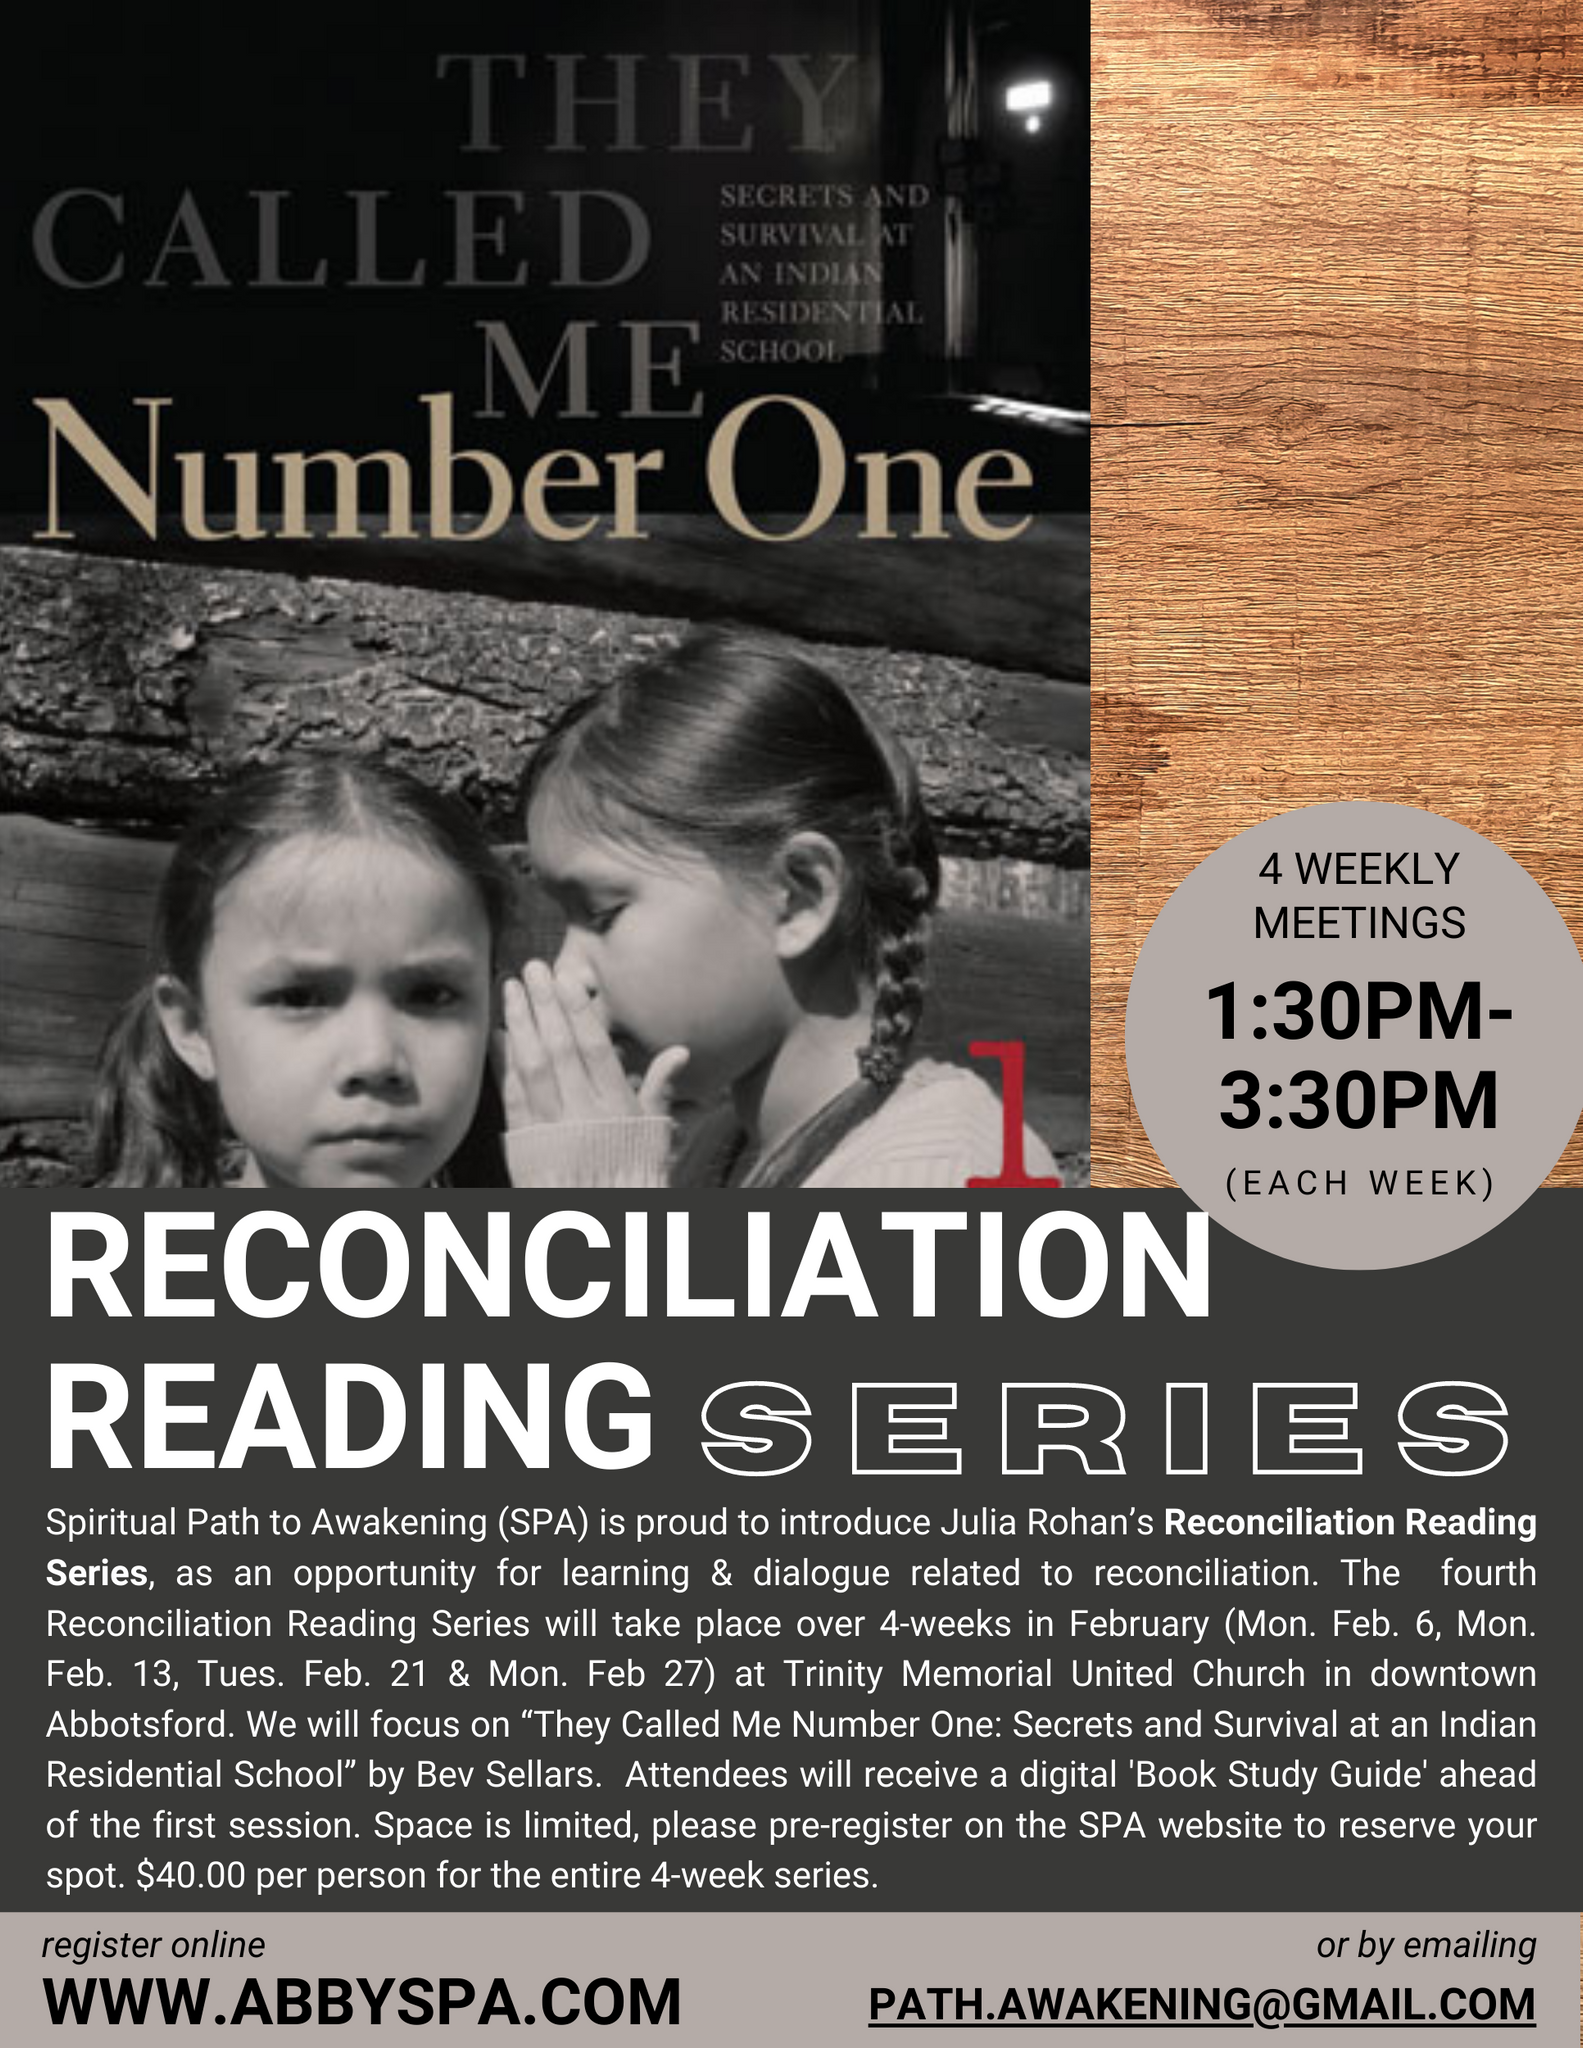 Reconciliation Reading Series (#4): “They Called Me Number One”